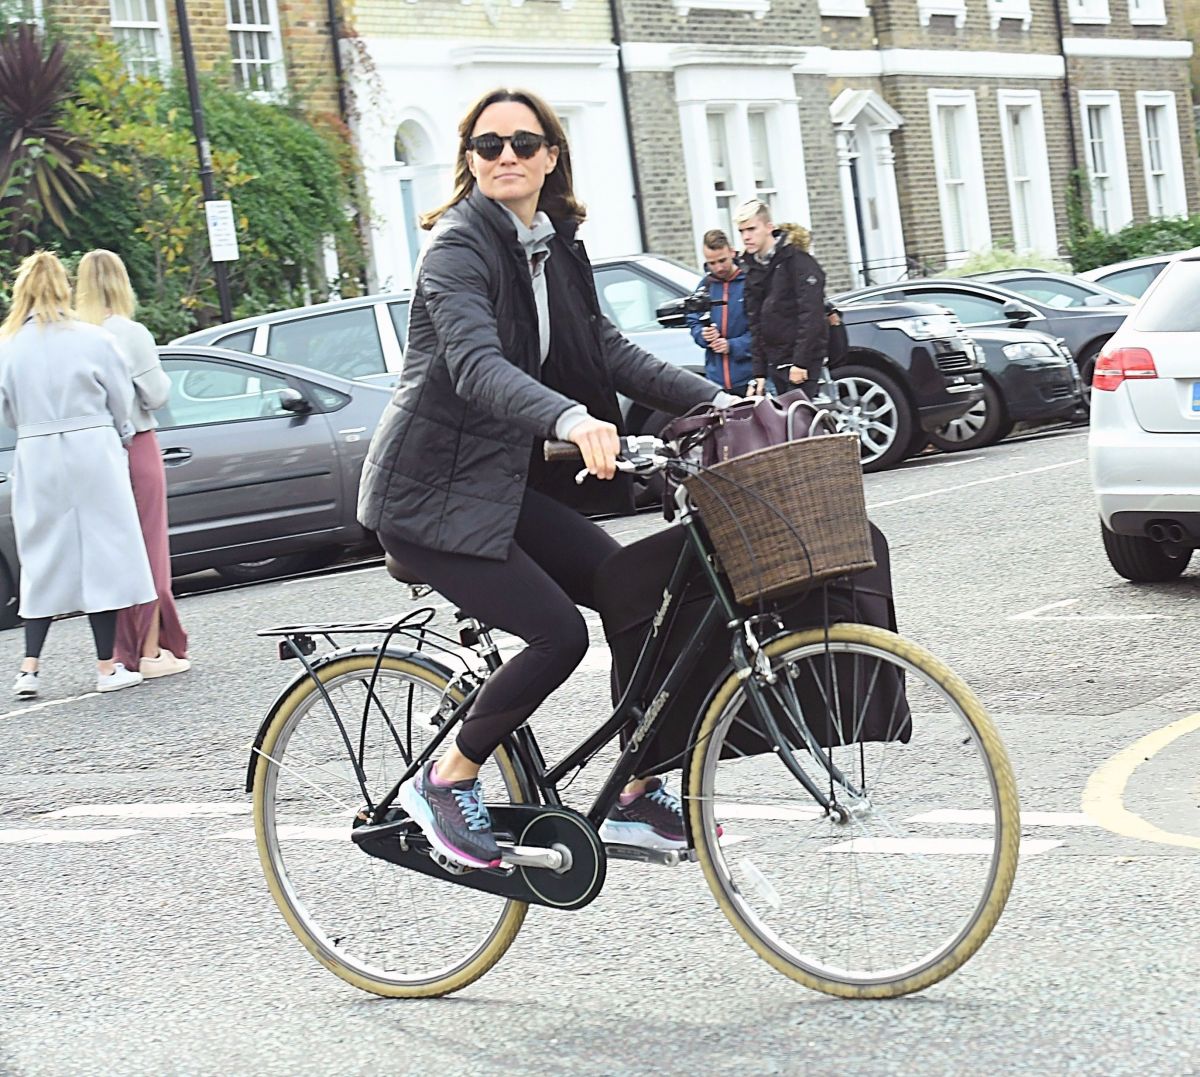 pippa-middleton-out-riding-a-bicycle-in-london-11-09-2017-3.jpg